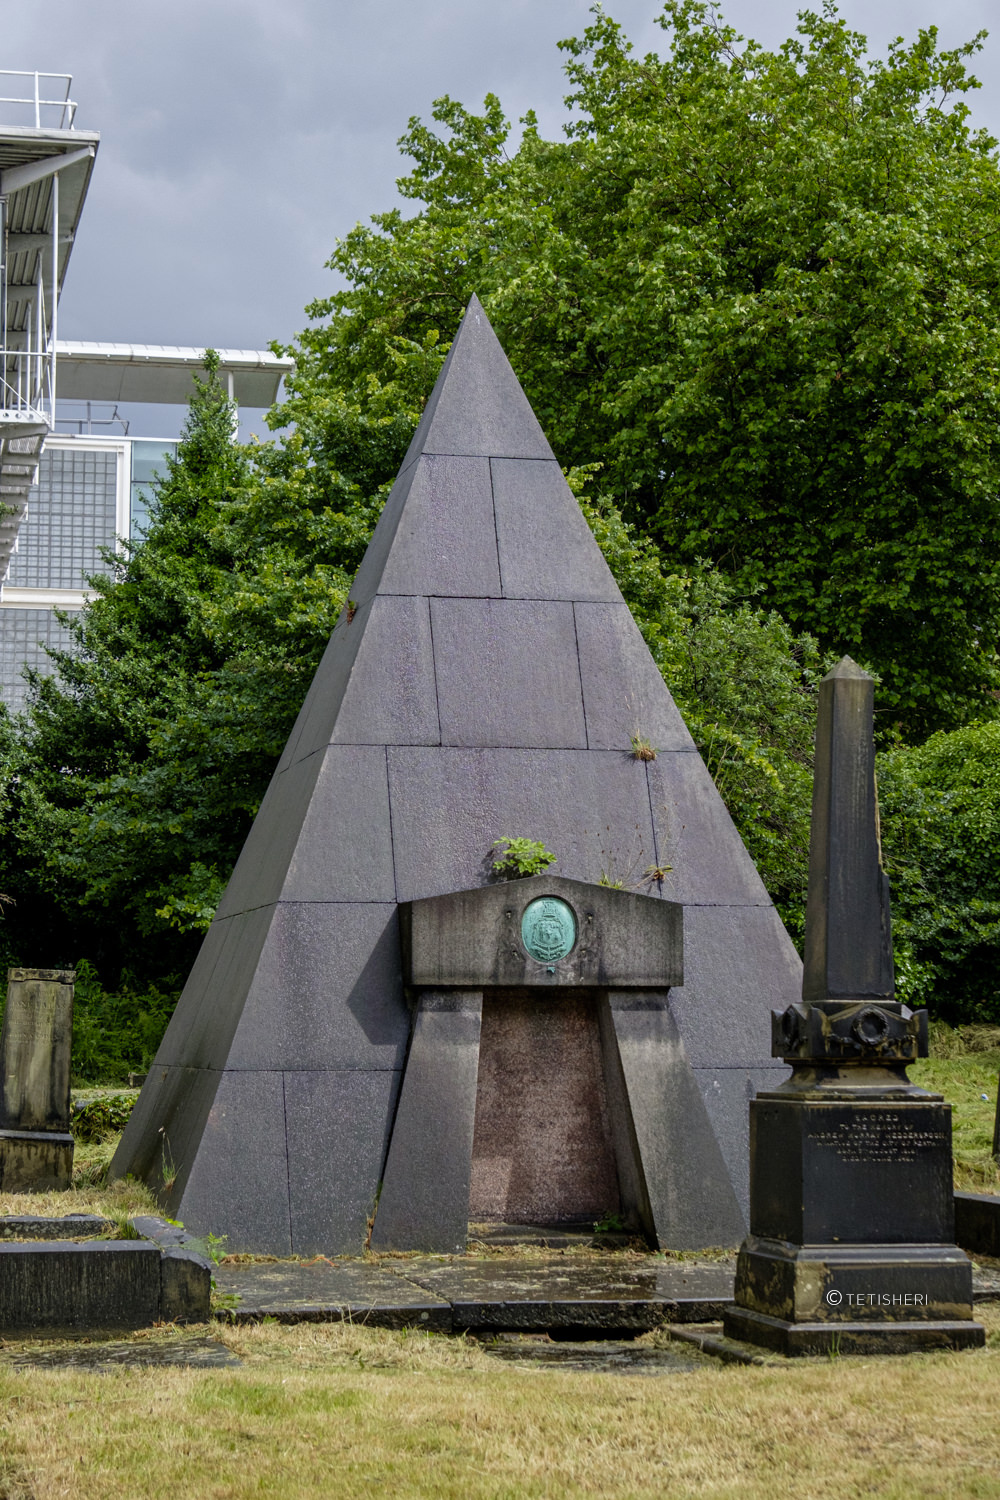 a pyramid-shaped tomb in a graveyard